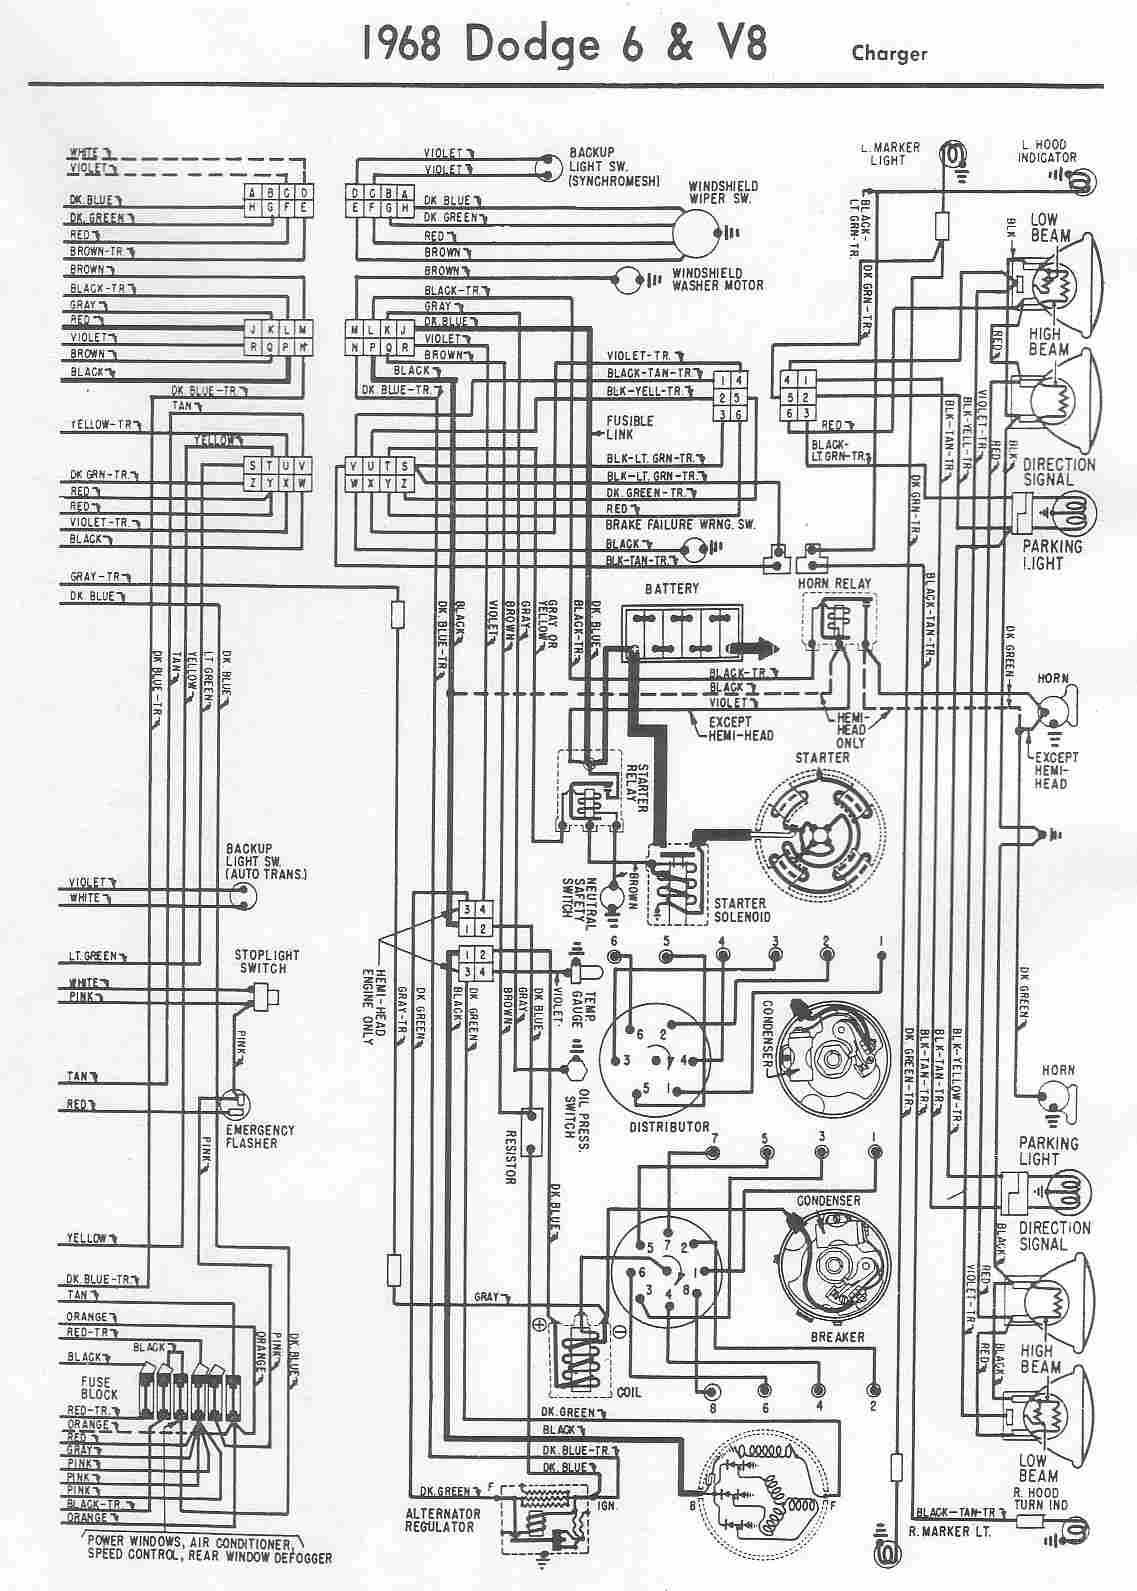 2006 Dodge Charger Rt Pcm Wiring Diagram from www.automotive-manuals.net